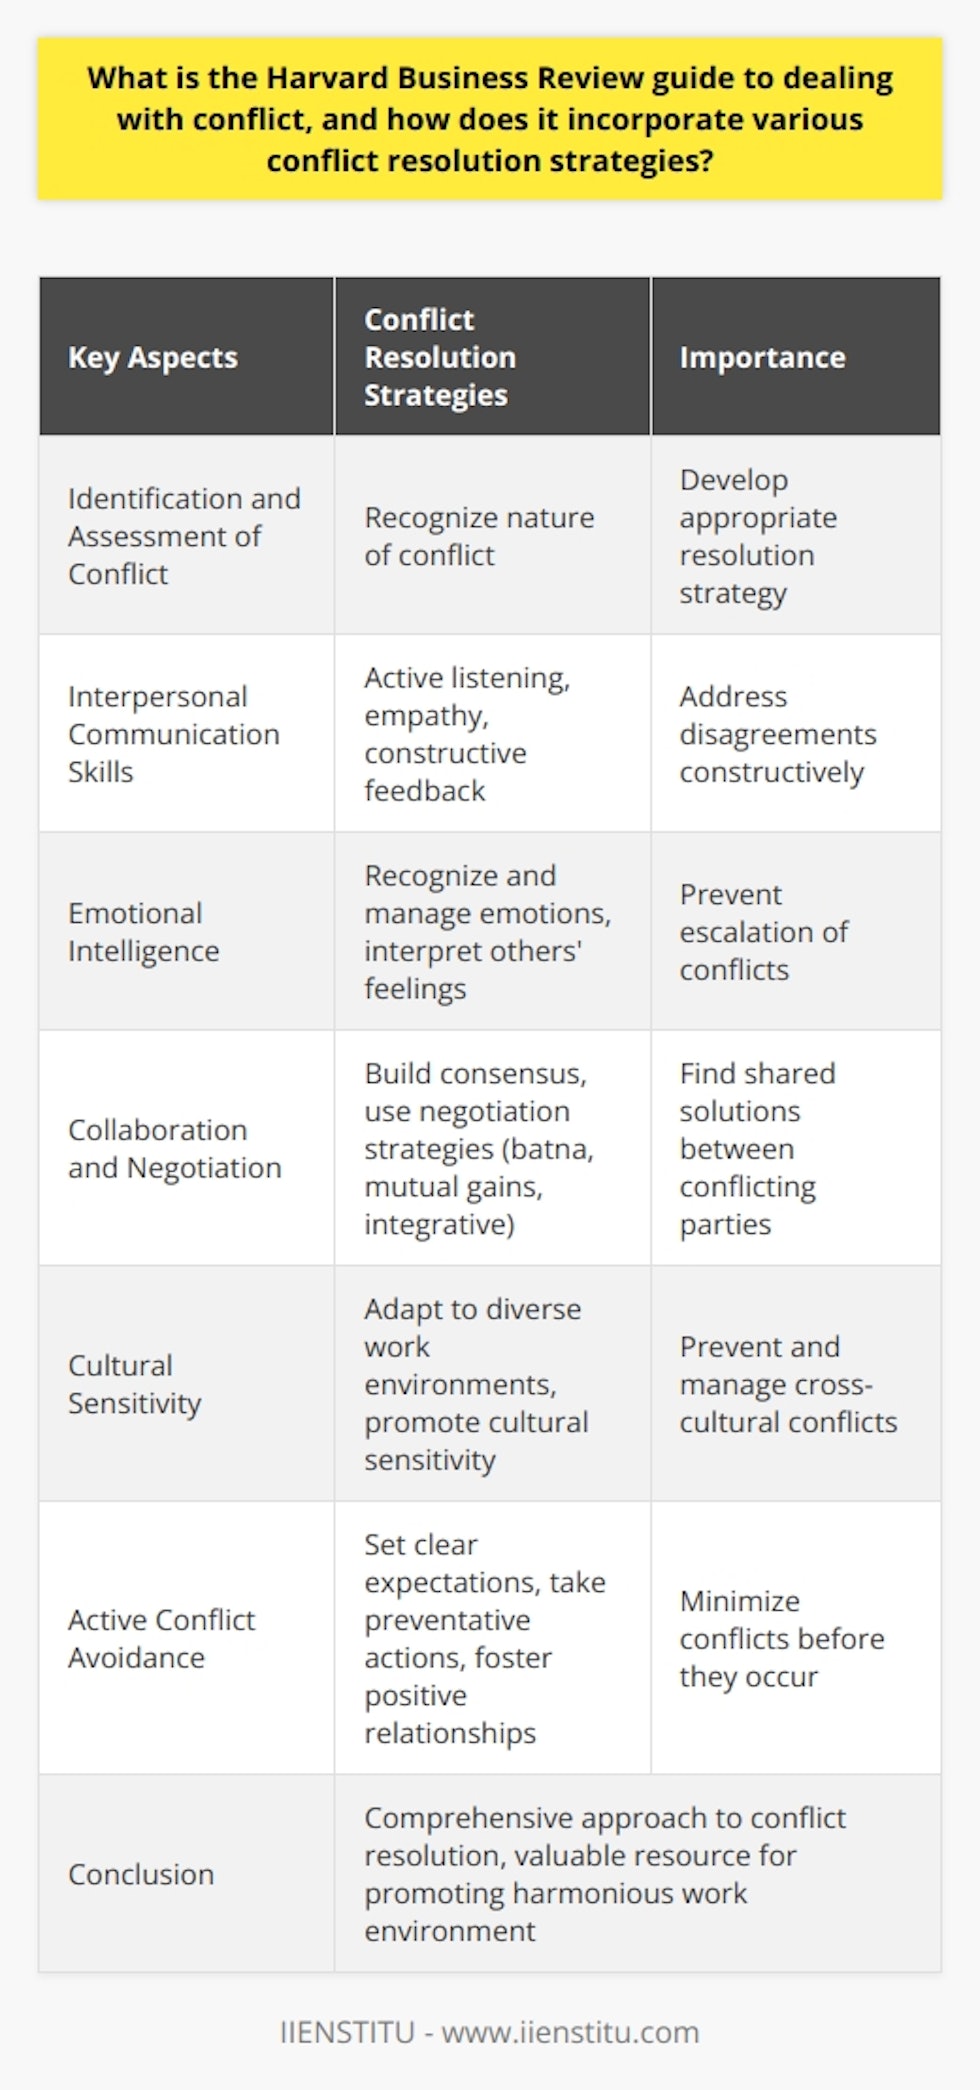 The Harvard Business Review Guide to Dealing with Conflict is a valuable resource that offers a comprehensive approach to resolving disputes in professional settings. By incorporating various conflict resolution strategies, this guide provides individuals with the necessary tools to navigate conflicts effectively.One of the key aspects of this guide is the identification and assessment of conflict. It helps individuals recognize the nature of the conflict, whether it is a simple disagreement, a power struggle, or a clash of values. Understanding the type of conflict is crucial in developing an appropriate resolution strategy.Interpersonal communication skills play a significant role in conflict resolution, and this guide emphasizes their importance. Active listening, empathy, and giving constructive feedback are highlighted as essential tools for addressing disagreements constructively. By fostering open dialogue, trust, and mutual respect, these skills contribute to successful conflict resolution.Emotional intelligence also plays a crucial role in dealing with conflict. The guide emphasizes the importance of recognizing and managing one's emotions, as well as interpreting the feelings of others. By effectively managing emotions, conflicts can be prevented from escalating, leading to more positive outcomes.Collaboration and negotiation are encouraged as effective conflict resolution strategies. The guide teaches individuals how to build consensus between conflicting parties, thereby enabling them to find shared solutions. Various negotiation strategies, such as batna, the mutual gains approach, and integrative negotiation, are discussed in detail.Recognizing the impact of cultural differences on conflicts, the guide provides strategies for adapting to diverse work environments. By promoting cultural sensitivity, individuals can effectively prevent and manage cross-cultural conflicts, fostering a more harmonious work environment.The guide also emphasizes the importance of active conflict avoidance. By setting clear expectations, taking preventative actions, and fostering positive relationships in the workplace, conflicts can be minimized before they even occur.In conclusion, the Harvard Business Review Guide to Dealing with Conflict offers a comprehensive approach to conflict resolution. By understanding the nature of conflicts, effectively communicating, managing emotions, negotiating, appreciating cultural differences, and actively avoiding conflict, individuals can successfully navigate disputes in professional settings. This guide is a valuable resource for those seeking to promote a more harmonious work environment.